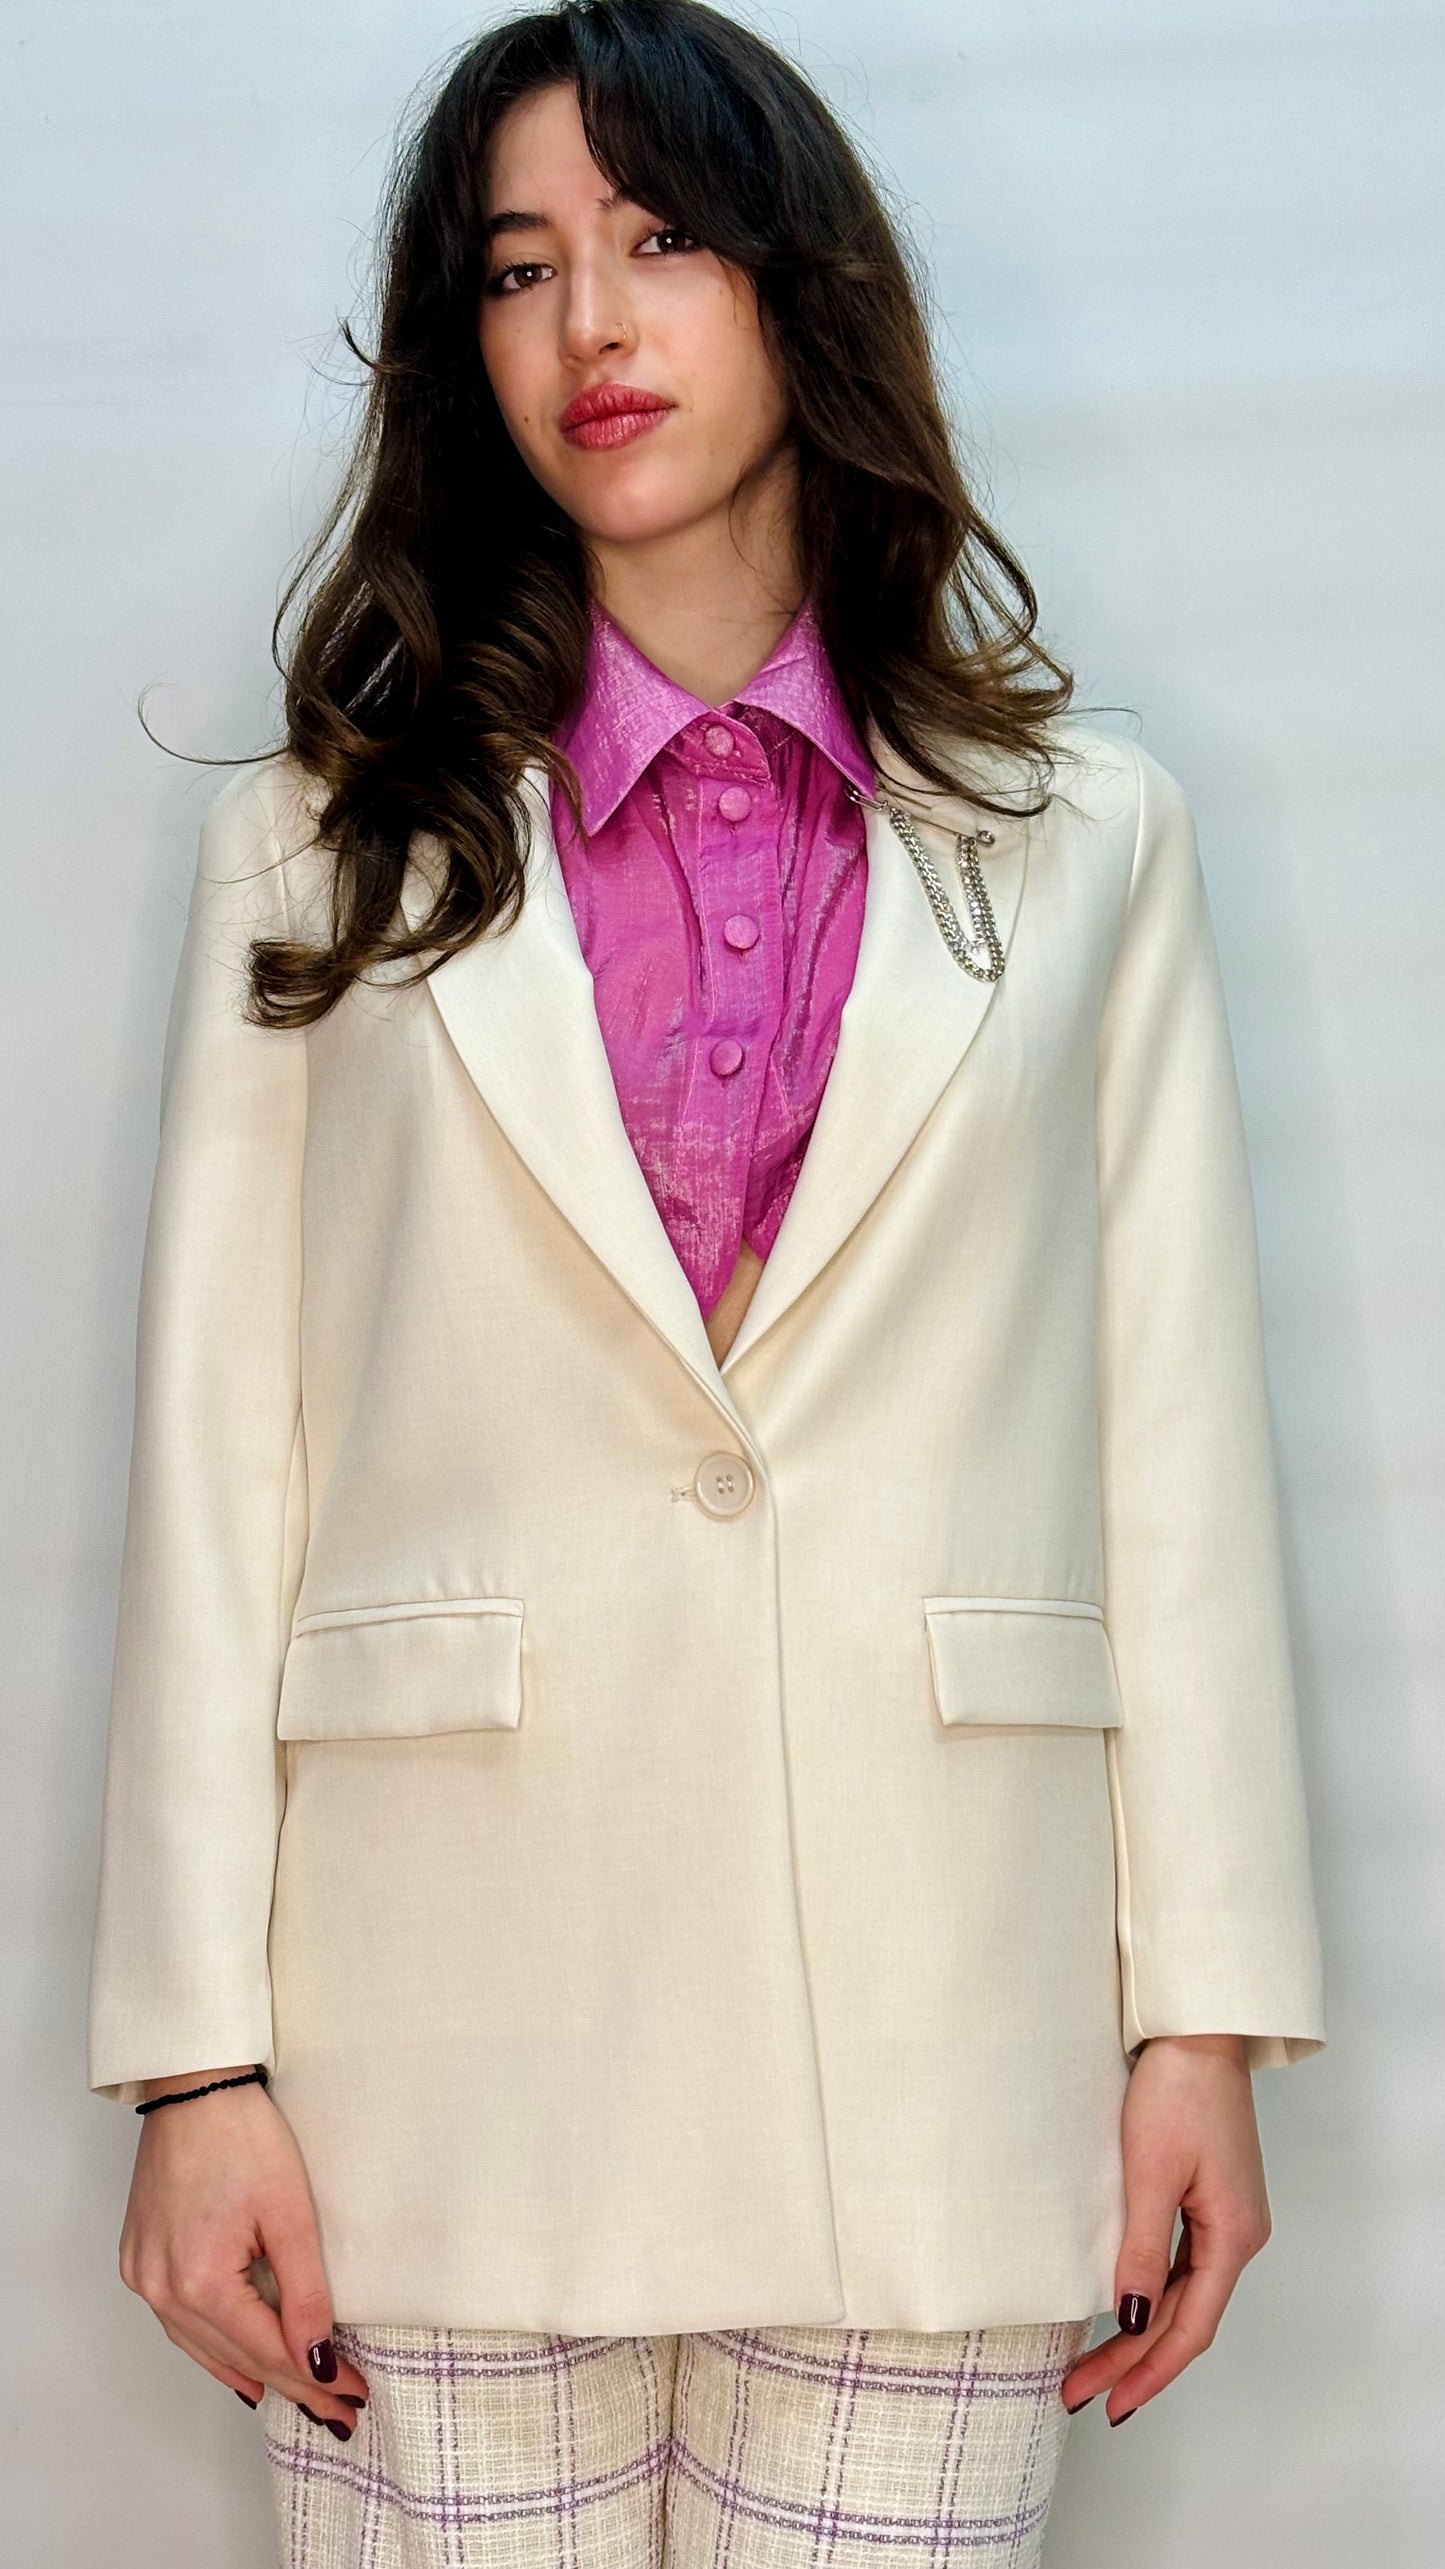 Offwhite blazer with collar pin